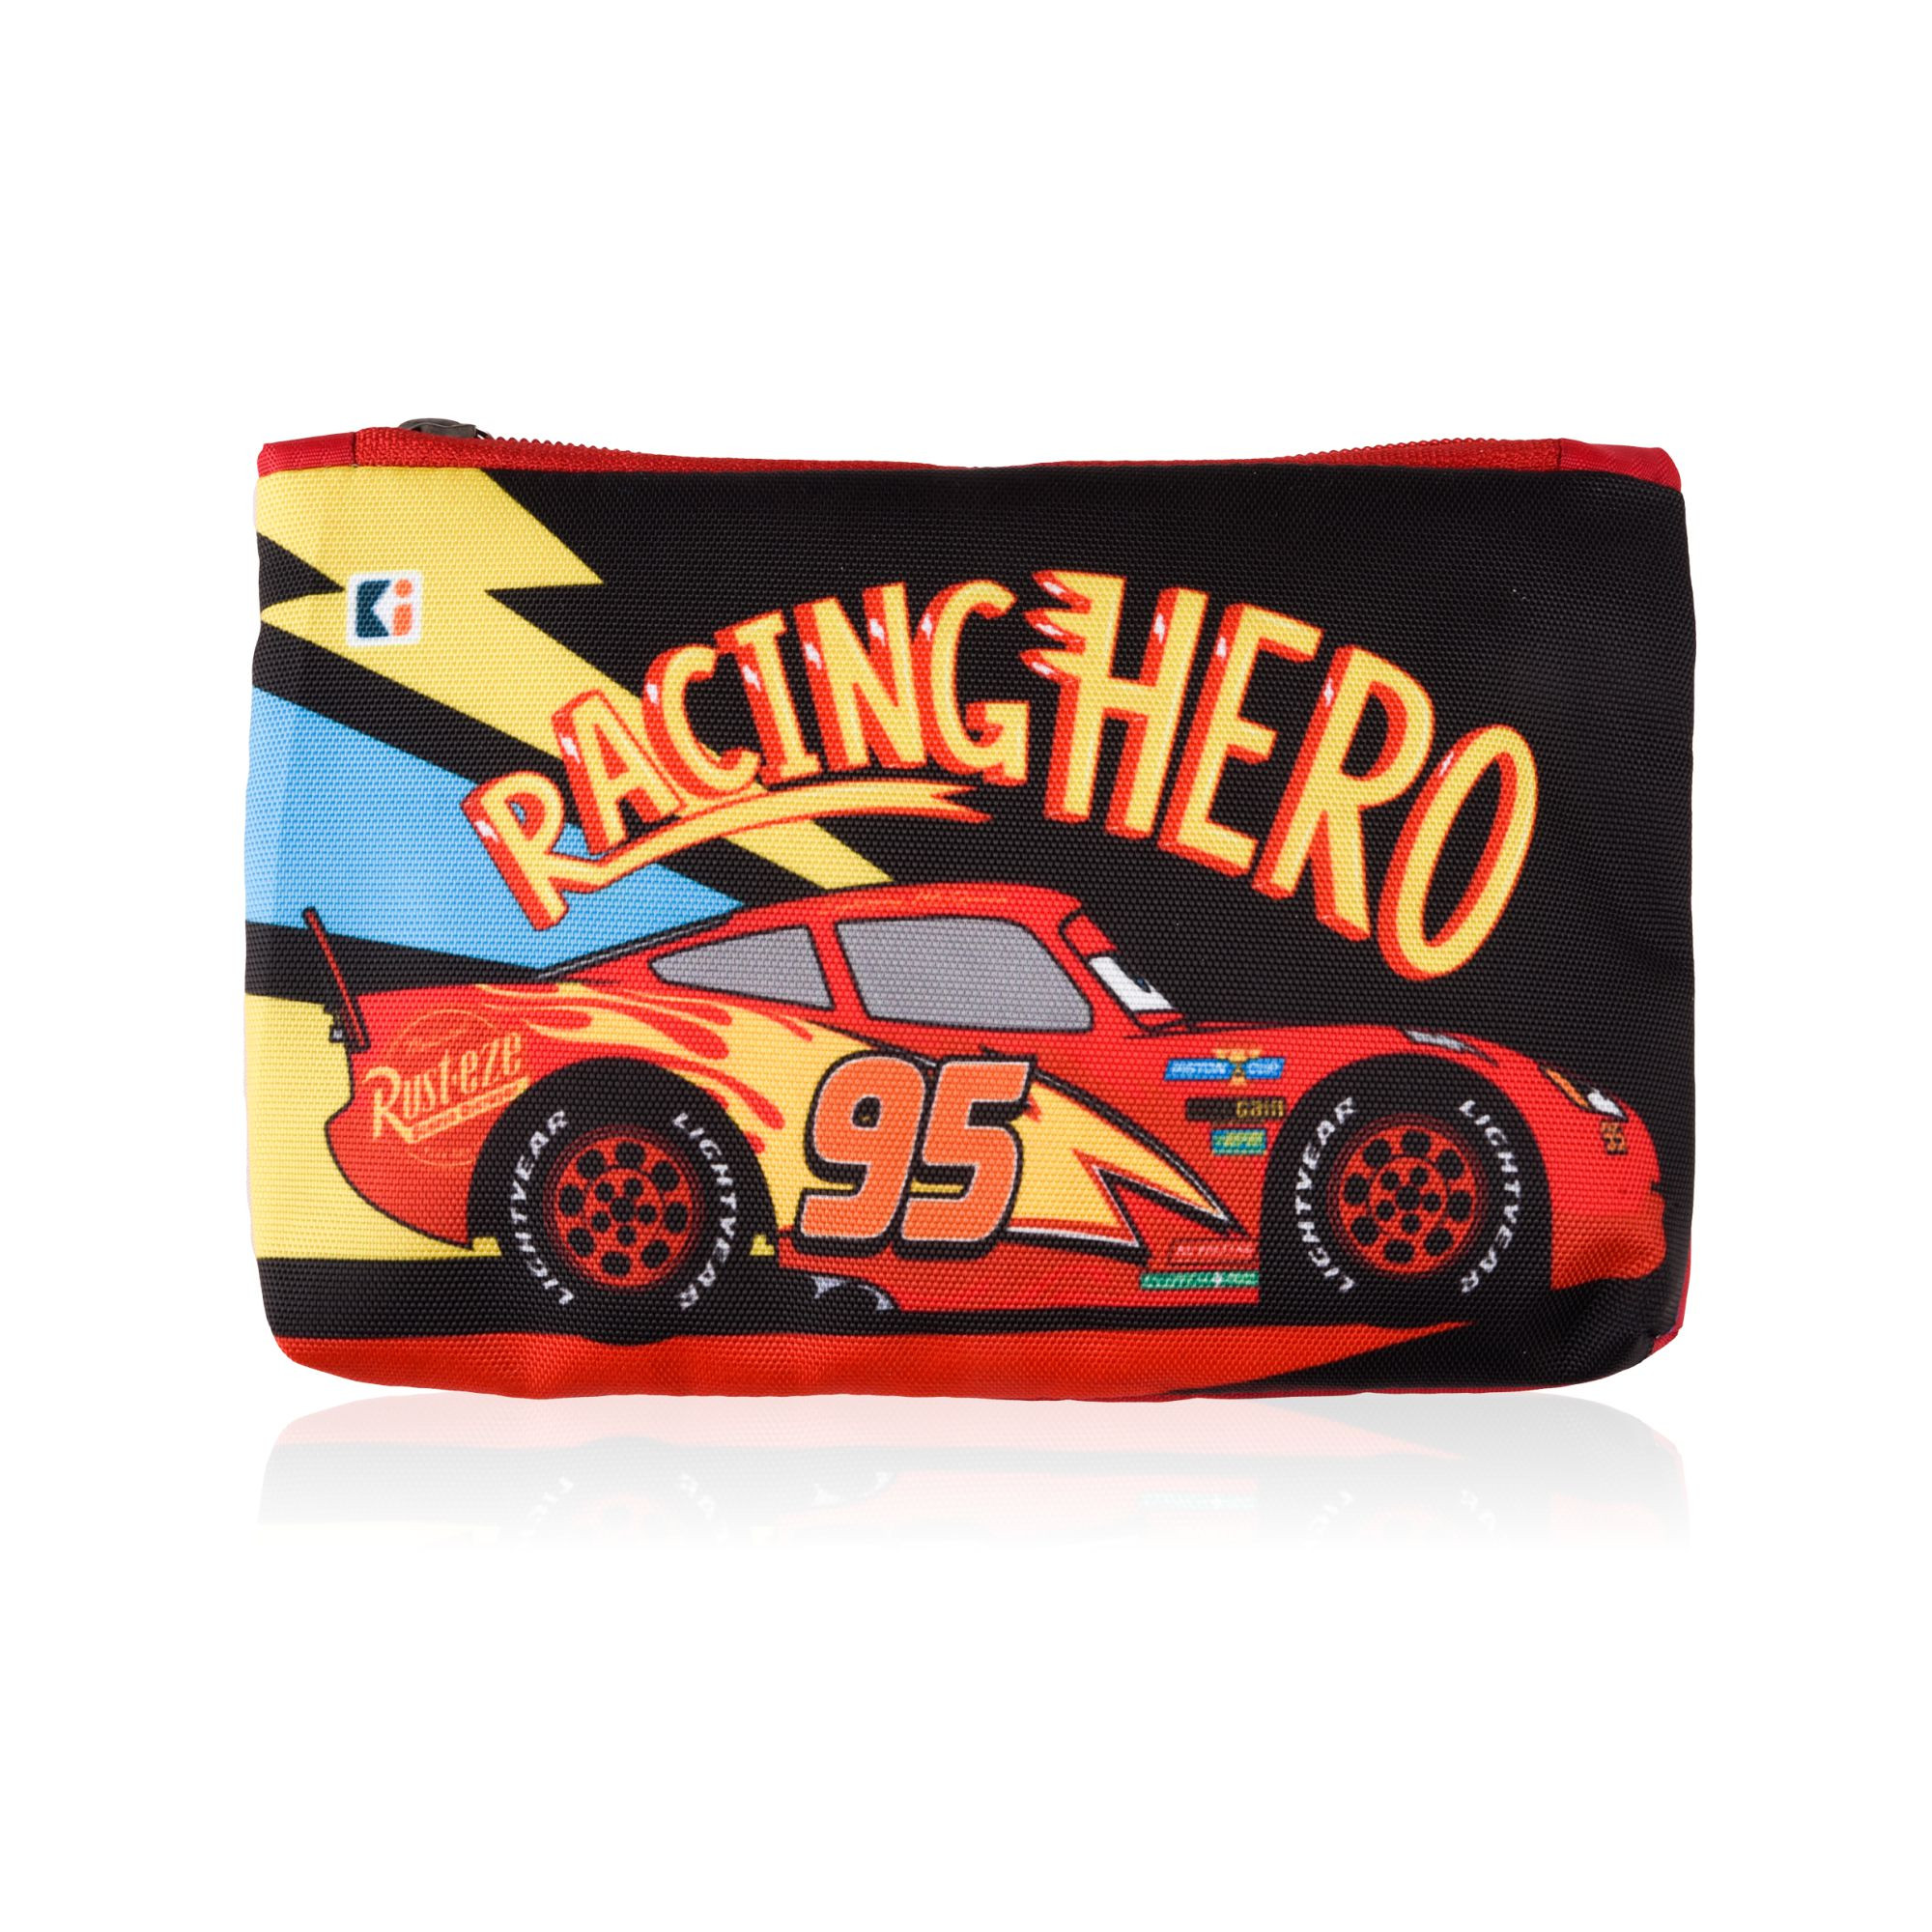 Kuber Industries Pencil Pouch | Square Stationary Pouch | Pen-Pencil Box for Kids | School Geometry Pouch | Pencil Utility Bag | Zipper Pencil Organizer | Disney-Racing Car | Red